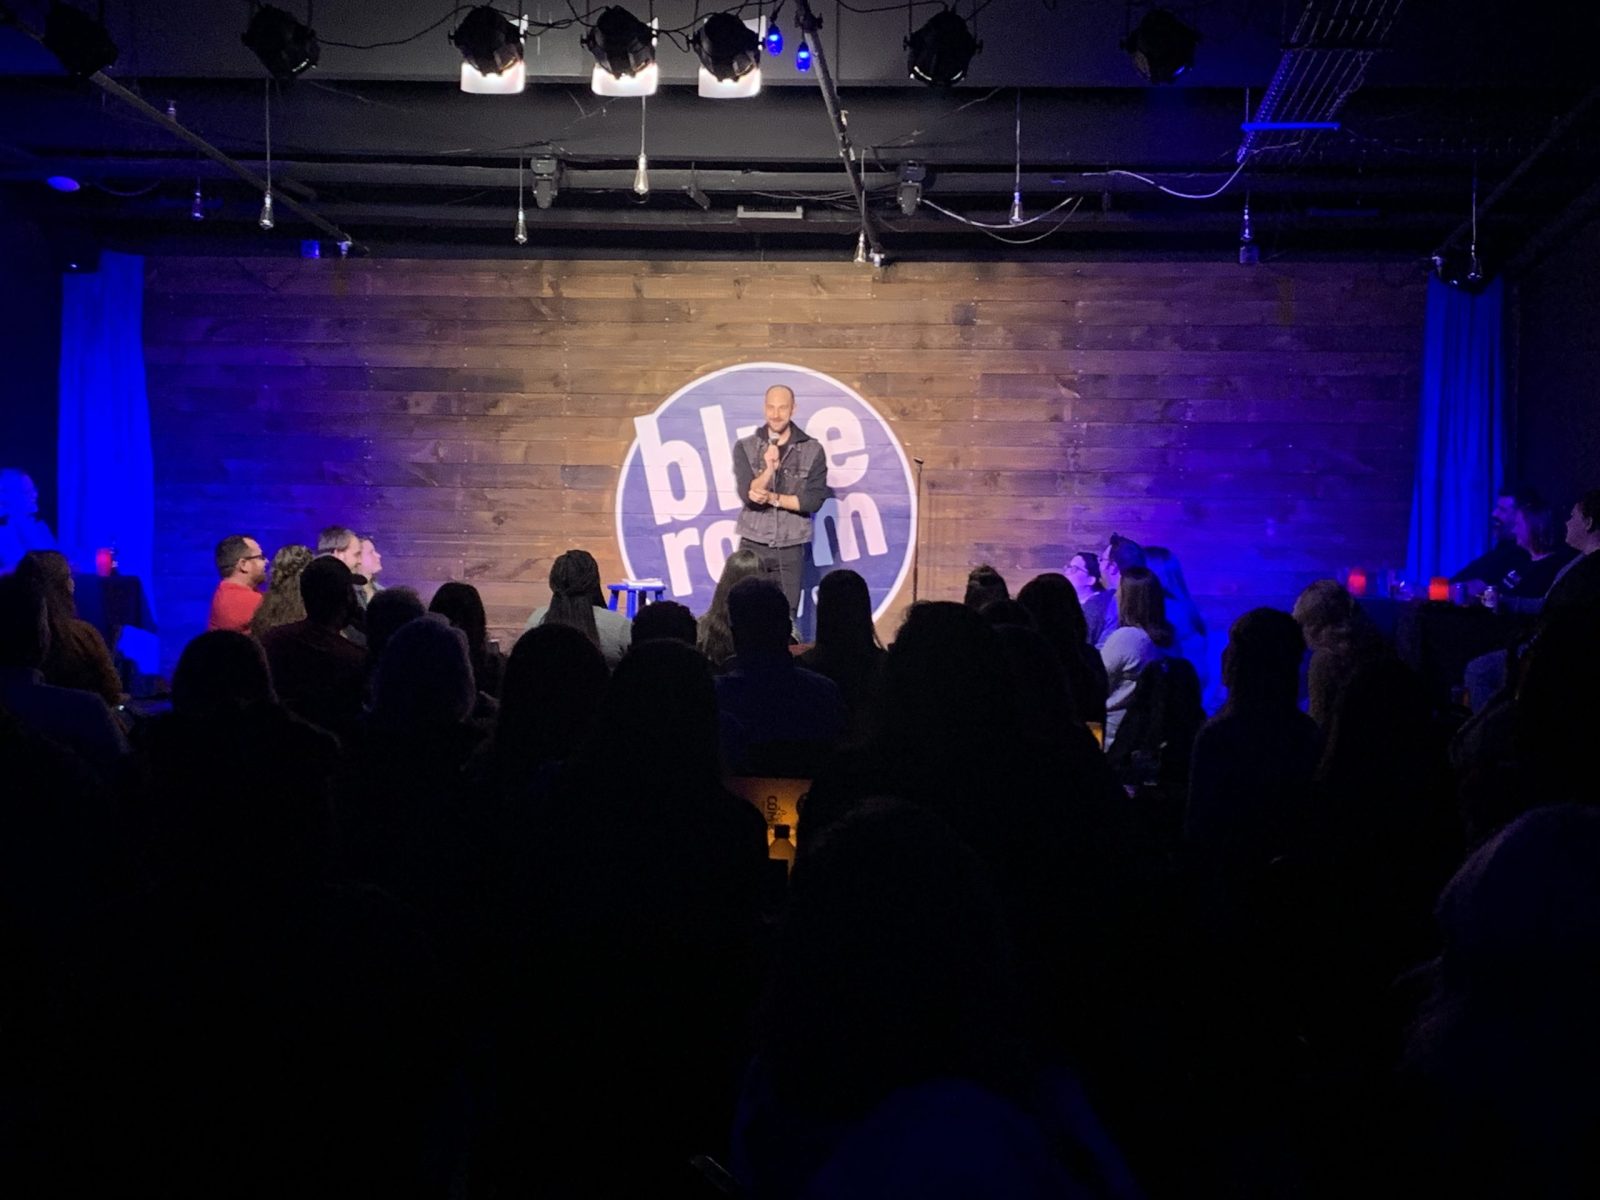 A comedian stands on stage at a club, telling jokes